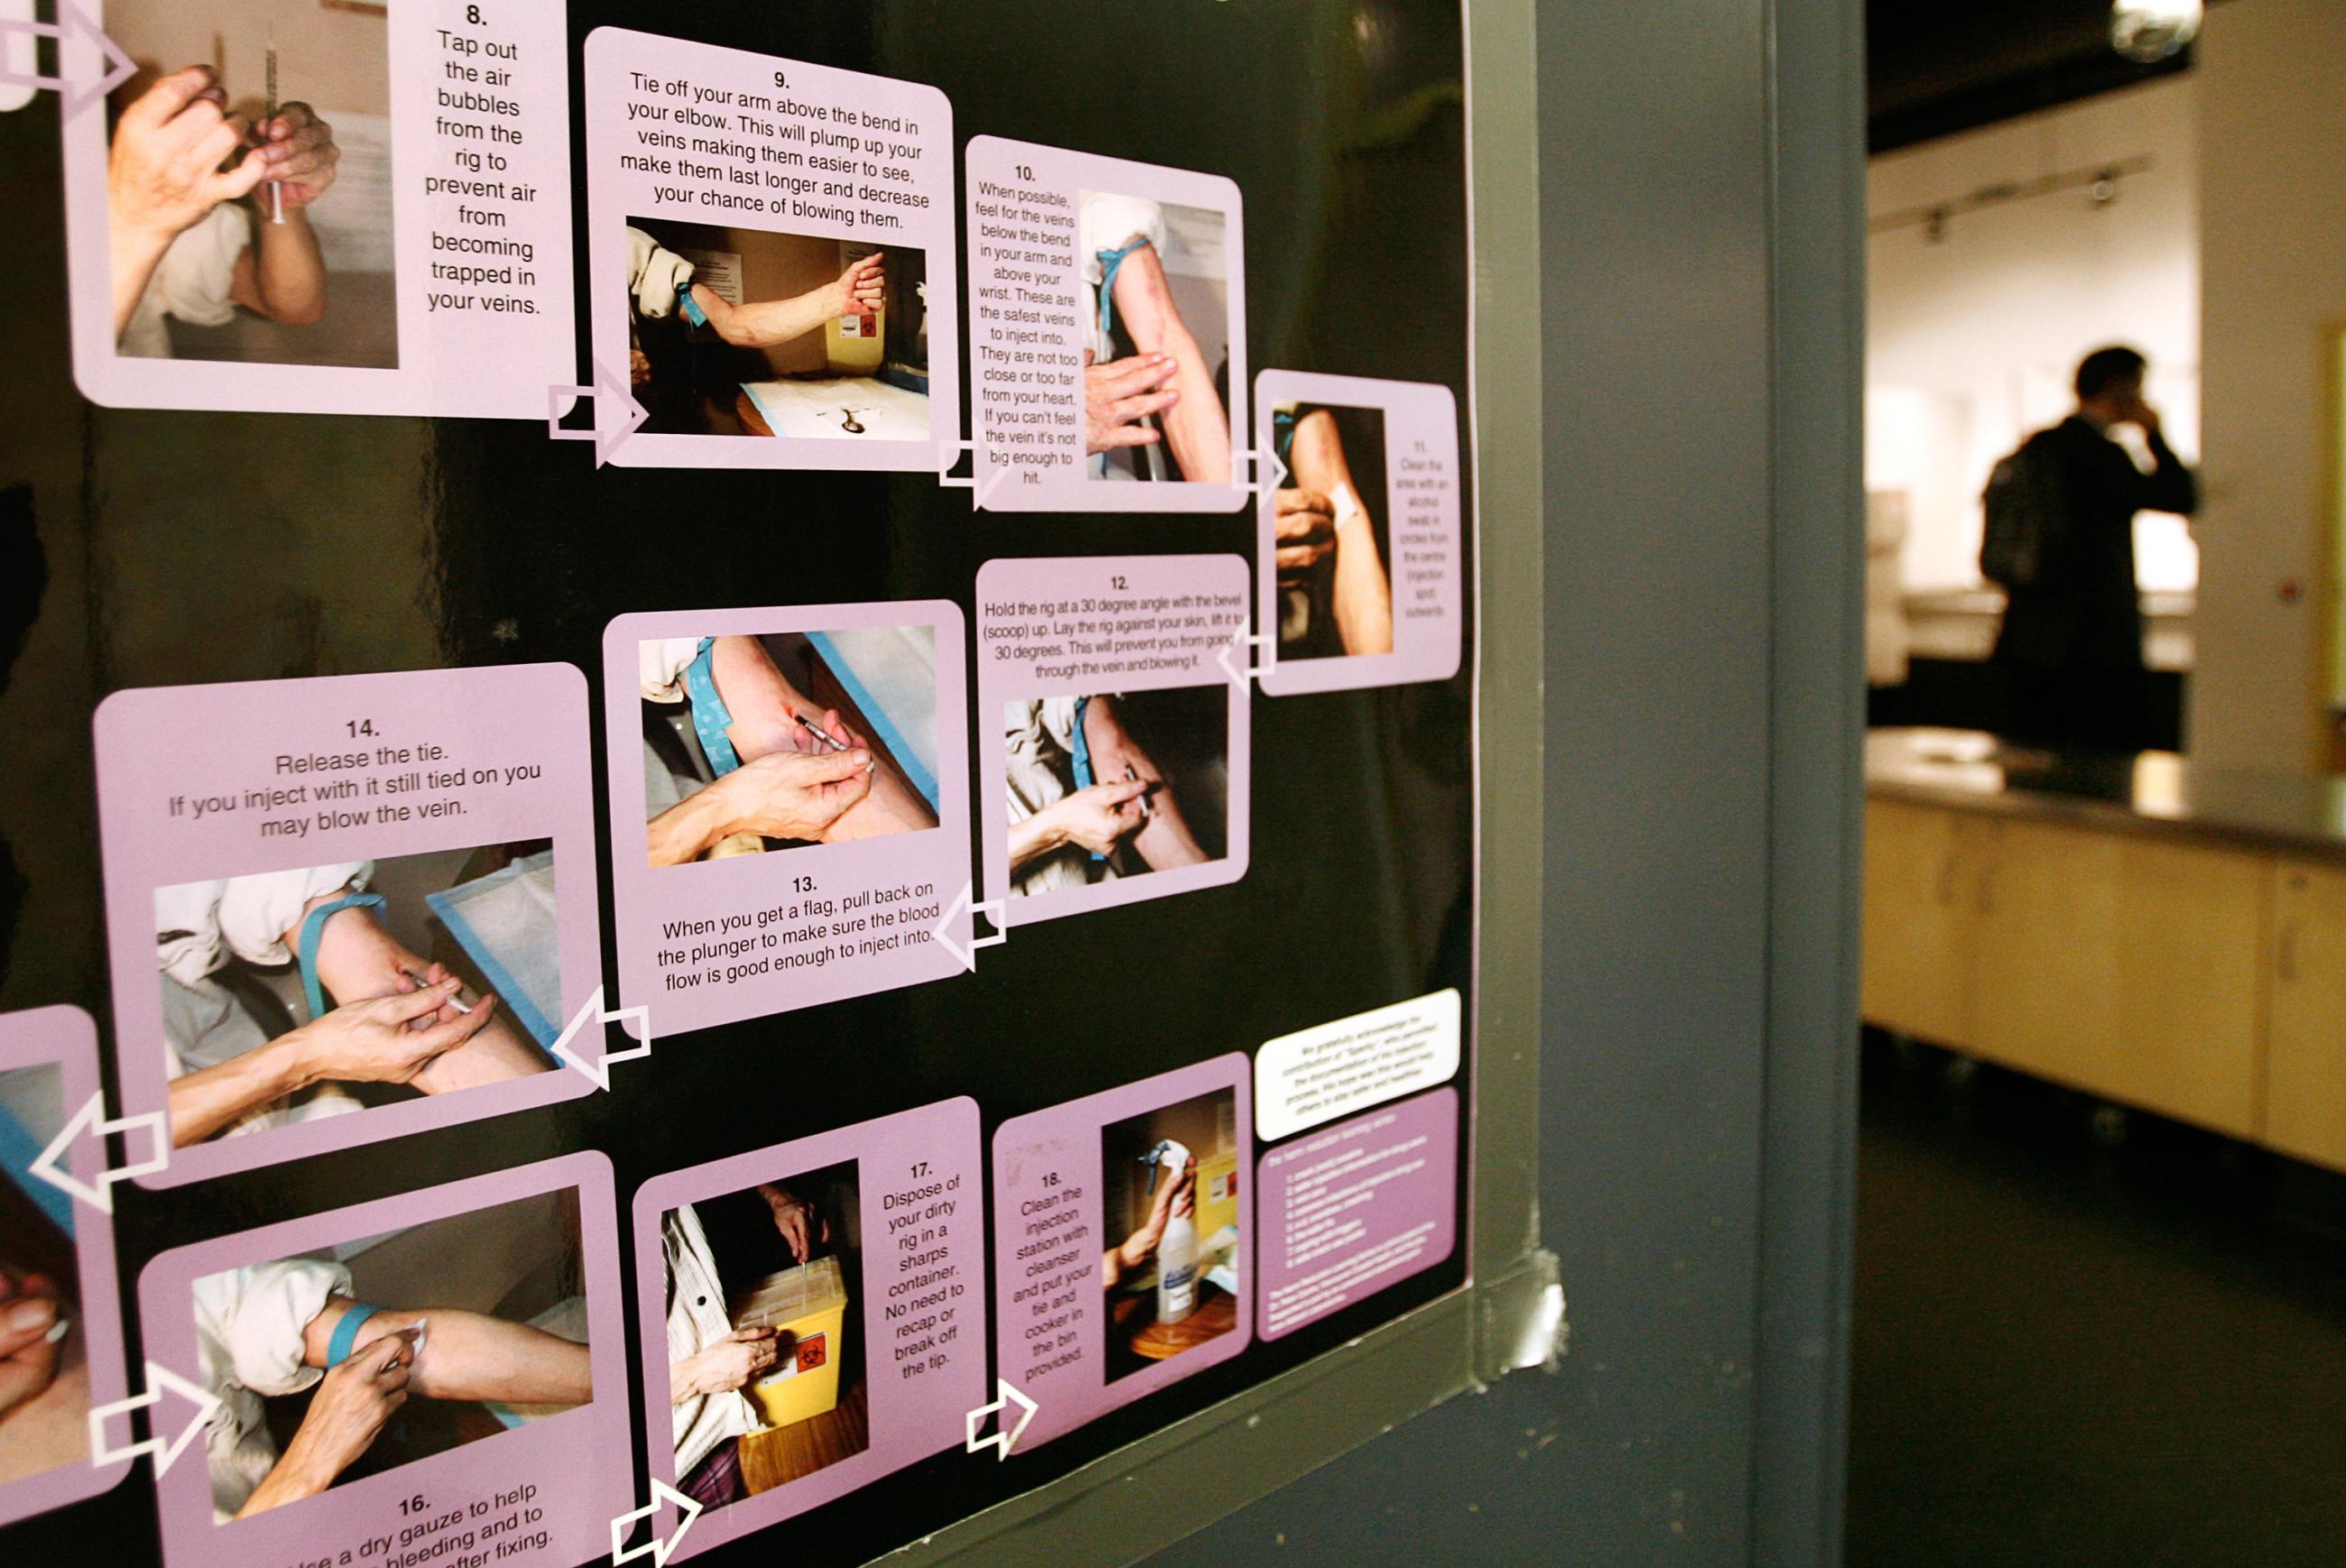 A poster shows how to use a syringe safely inside a safe injection site for drug addicts on Vancouver, British Columbia's eastside August 23, 2006. 